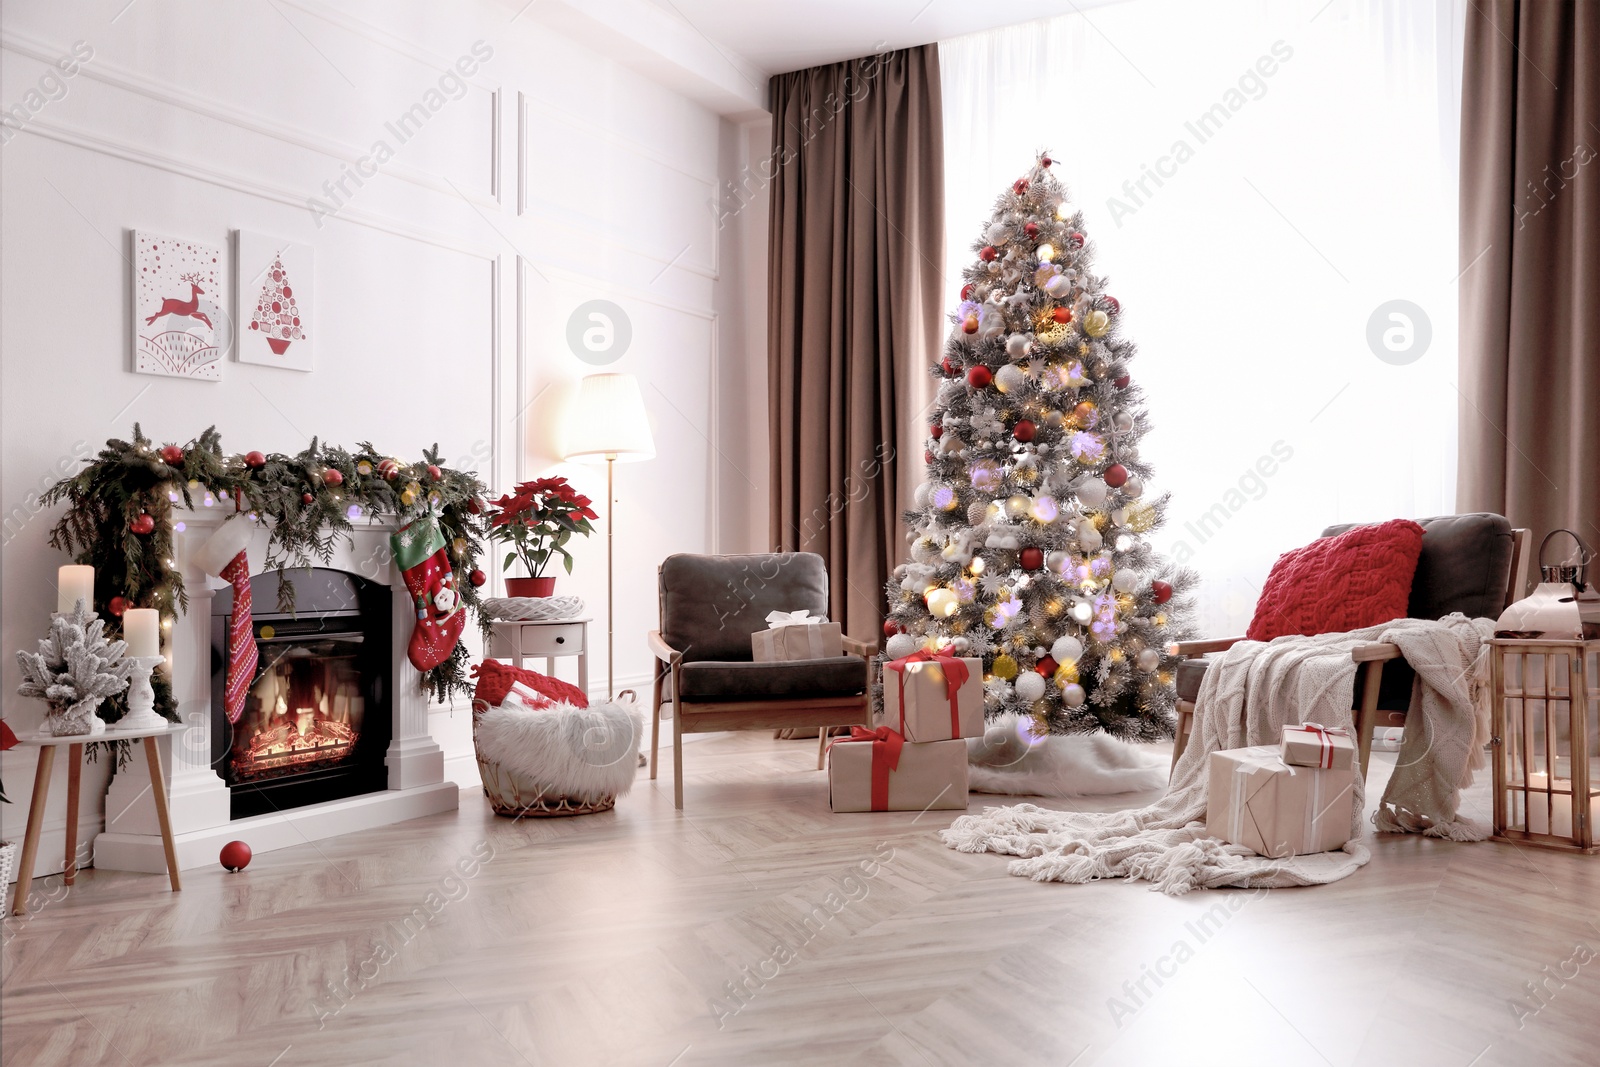 Image of Stylish room interior with fireplace and beautiful Christmas tree